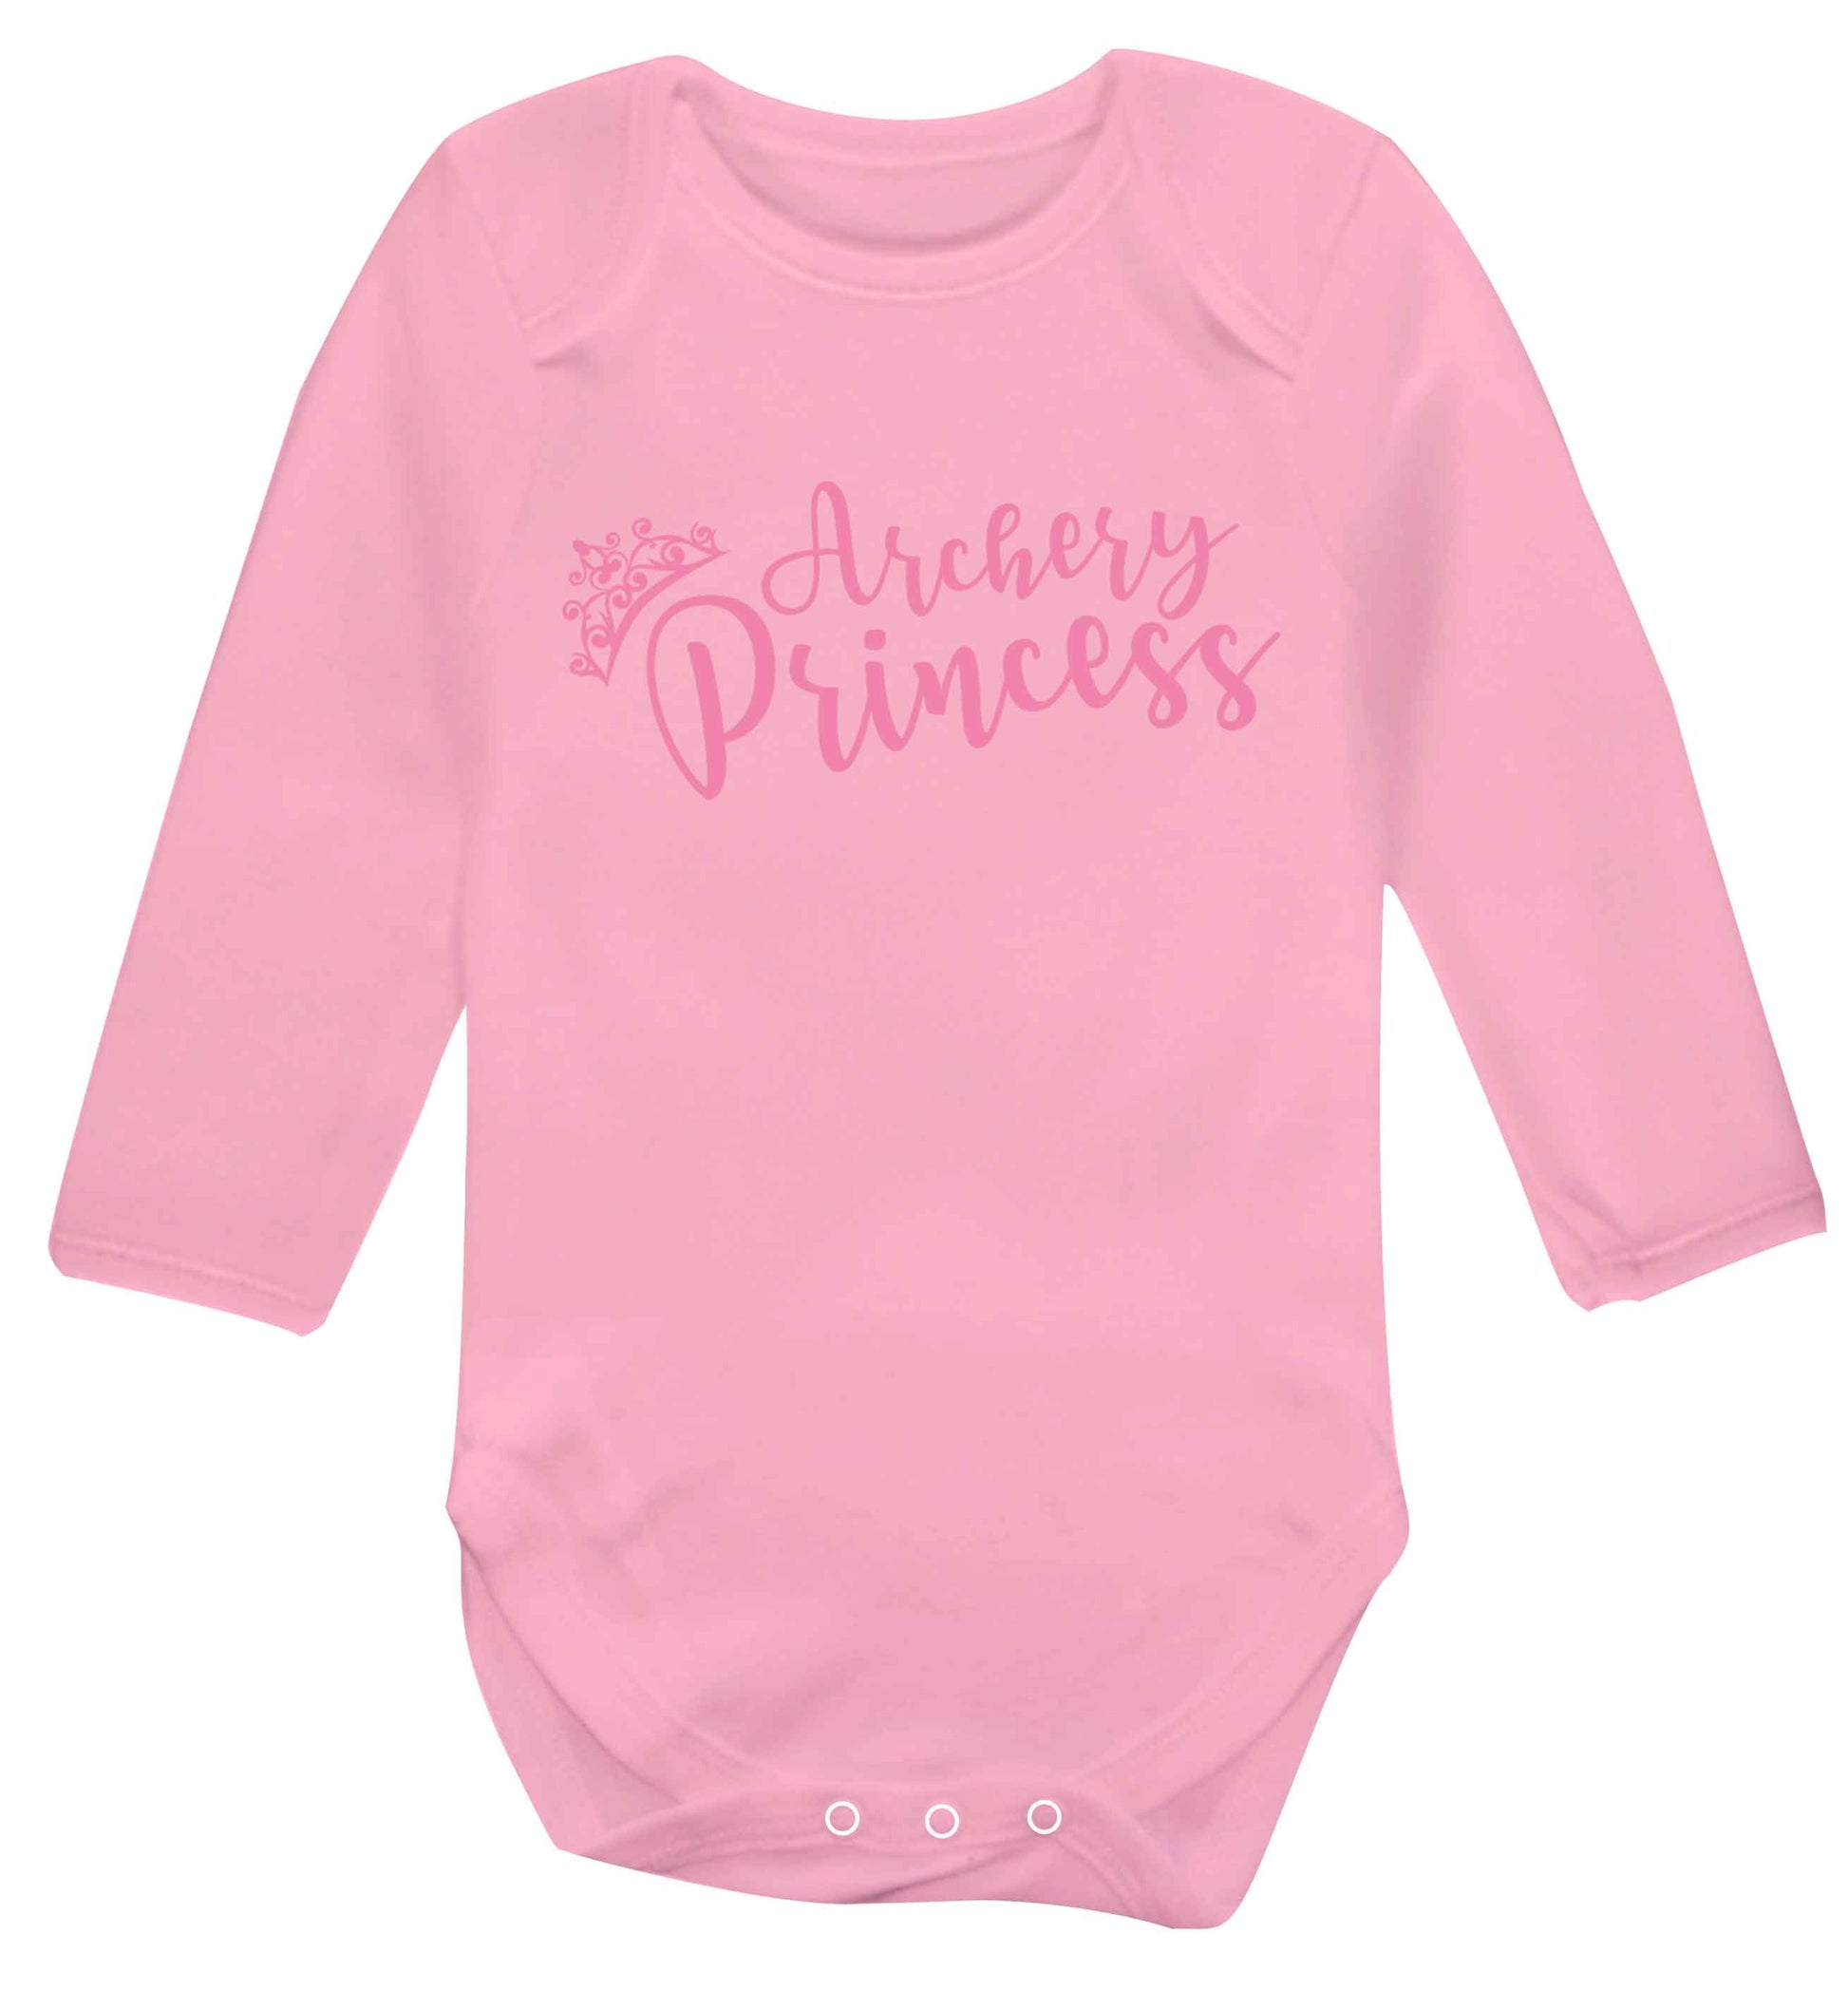 Archery princess Baby Vest long sleeved pale pink 6-12 months